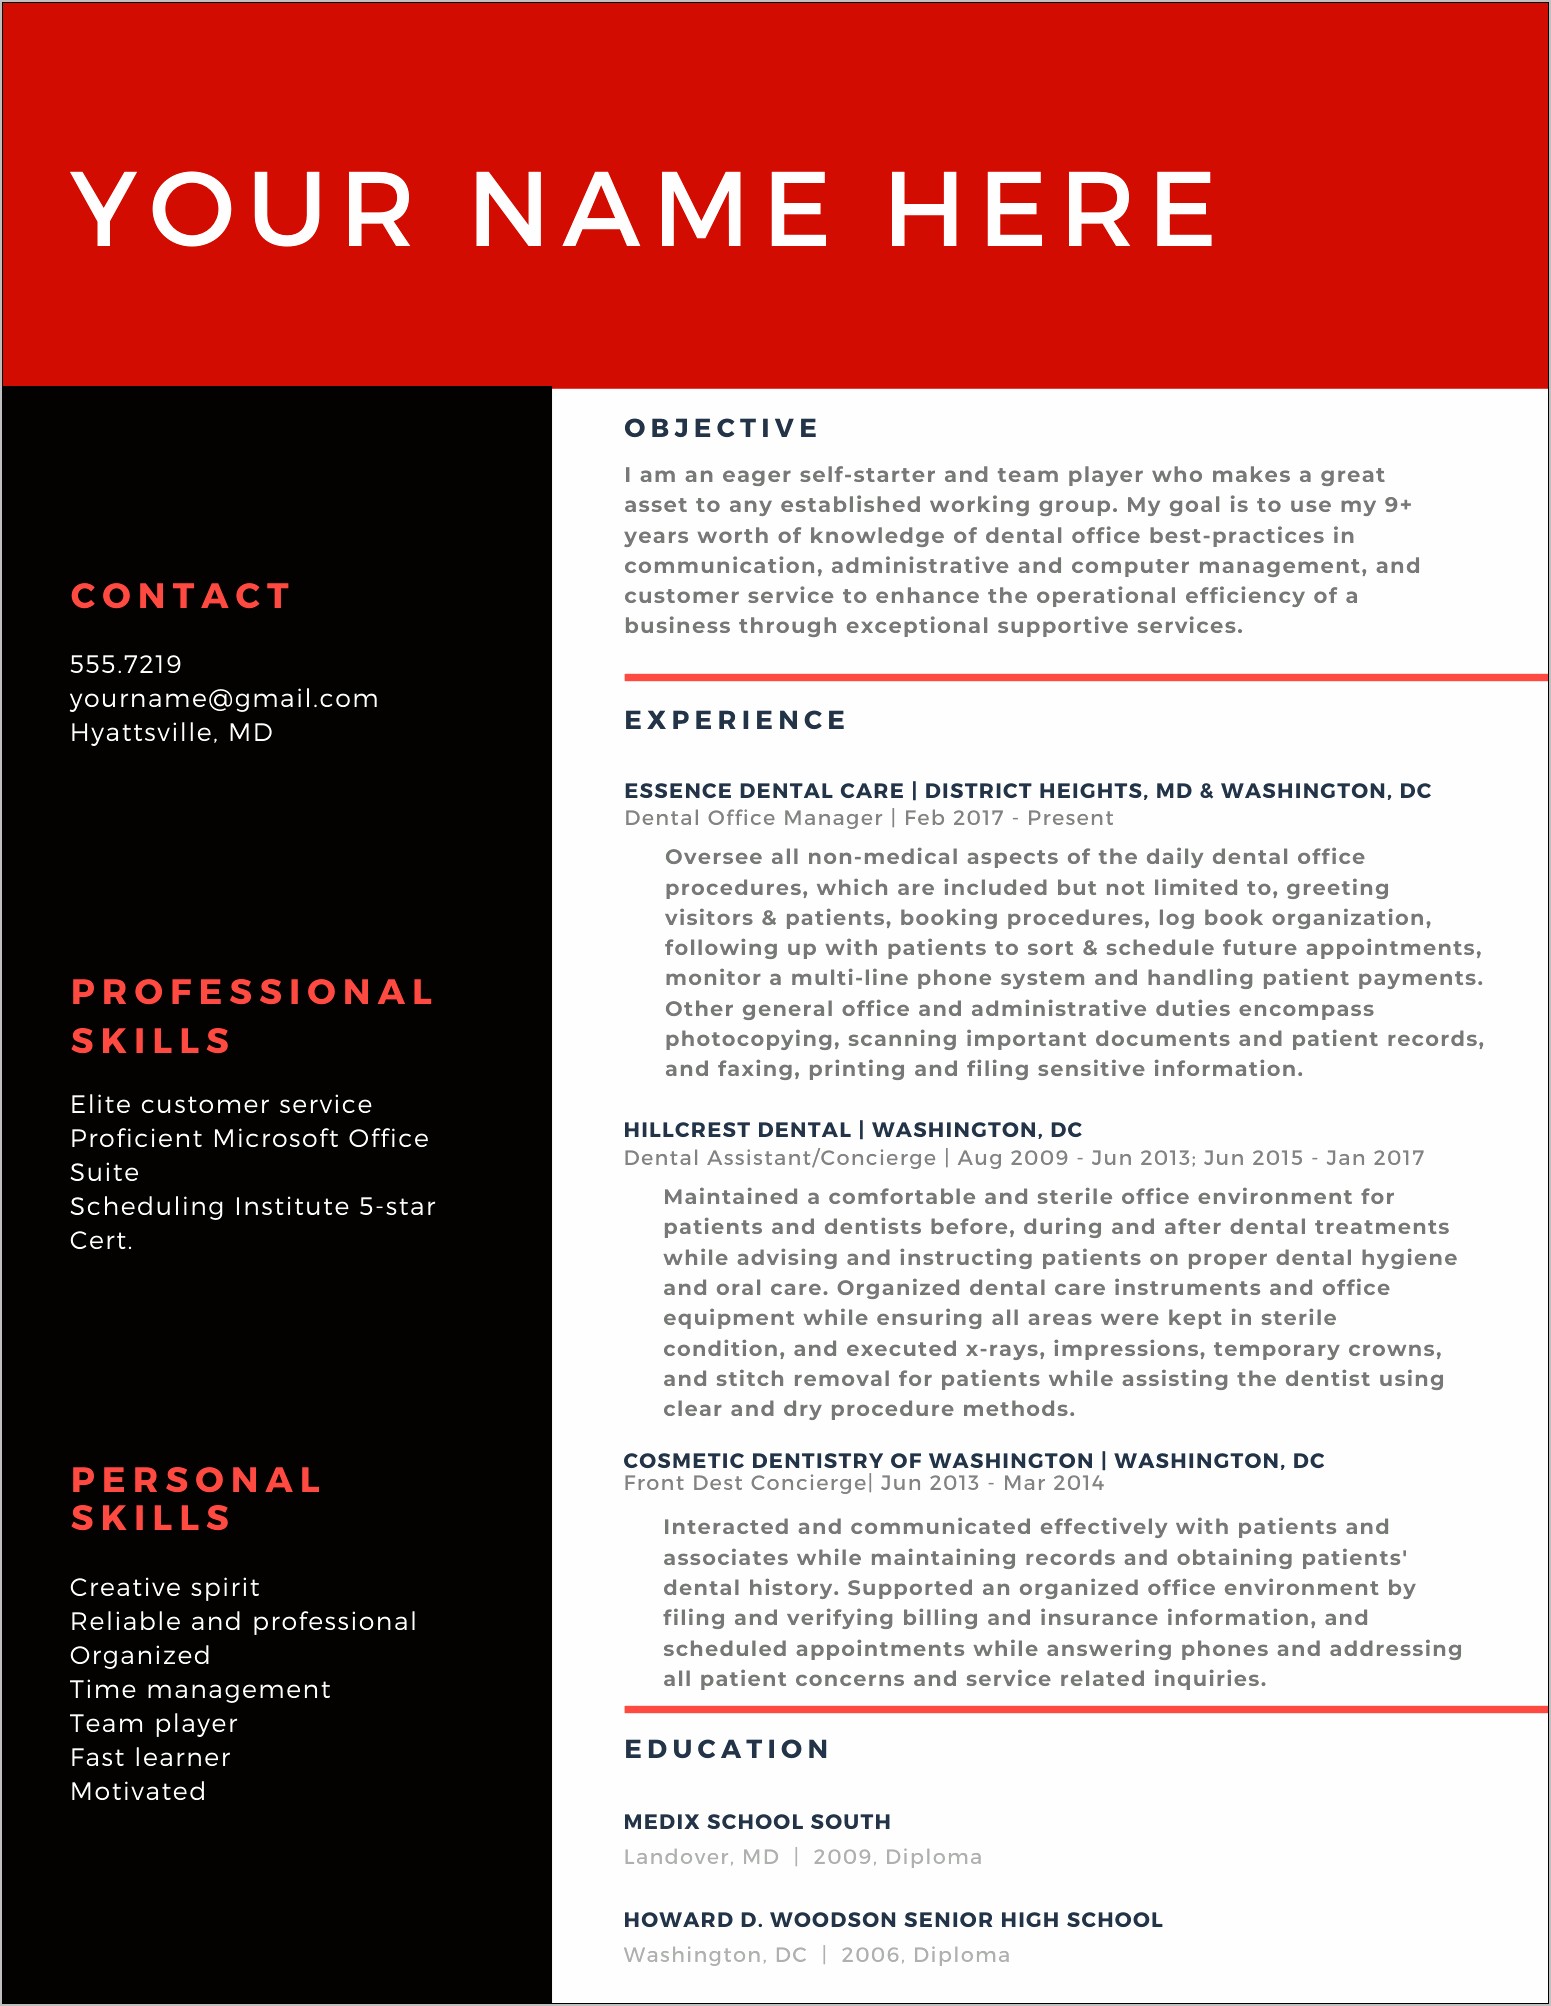 Resume And Cover Letter Revamp Services